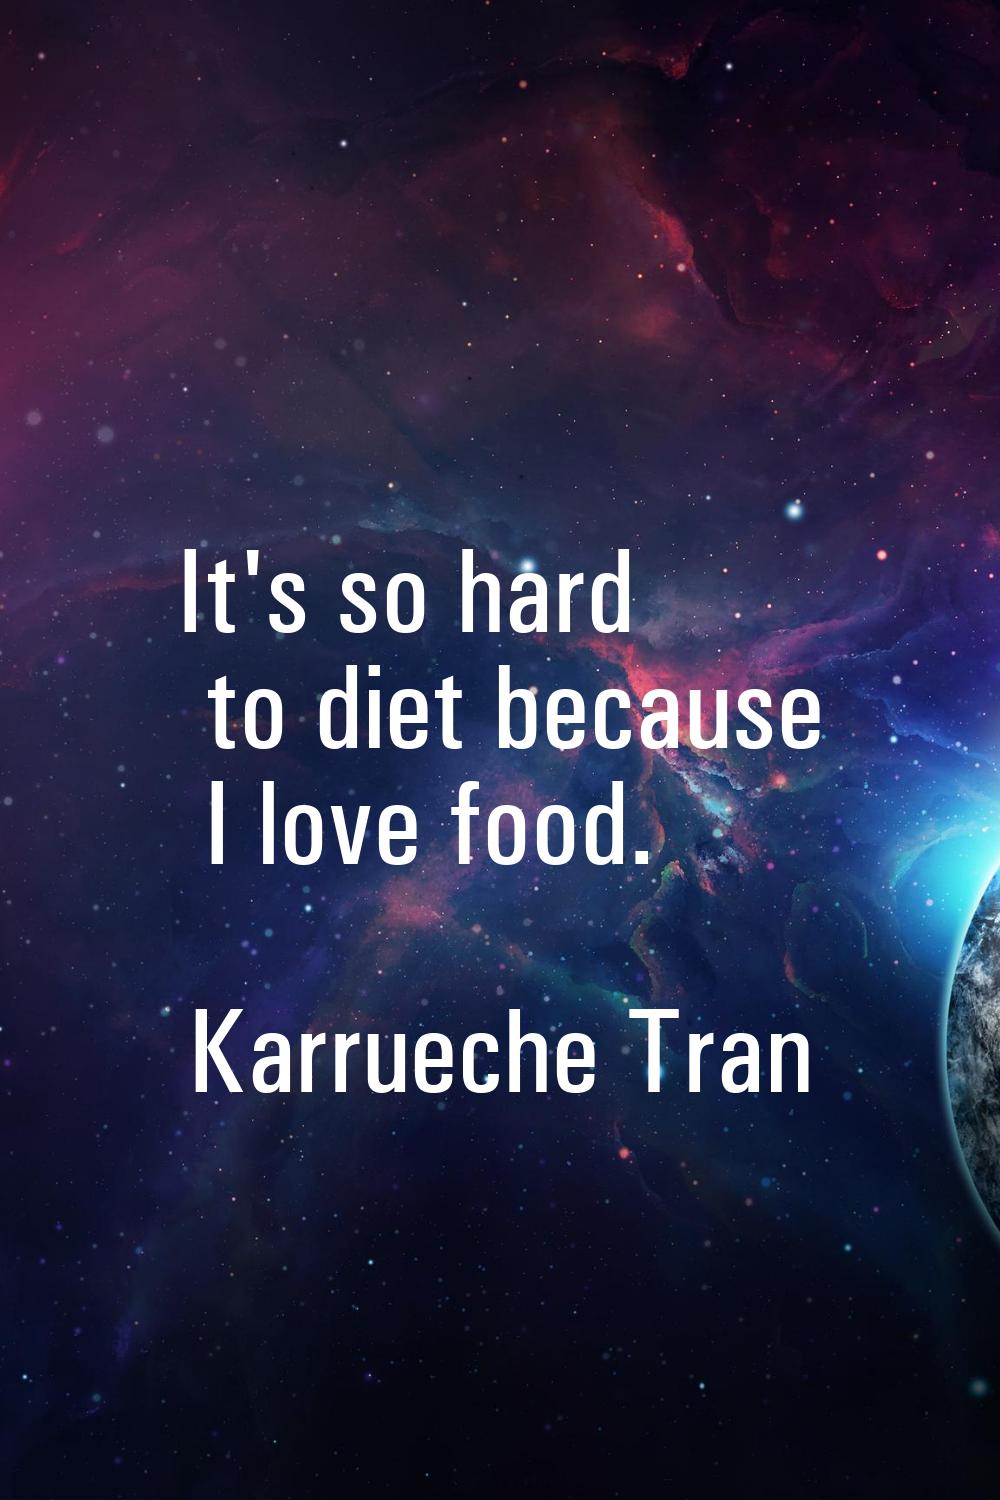 It's so hard to diet because I love food.